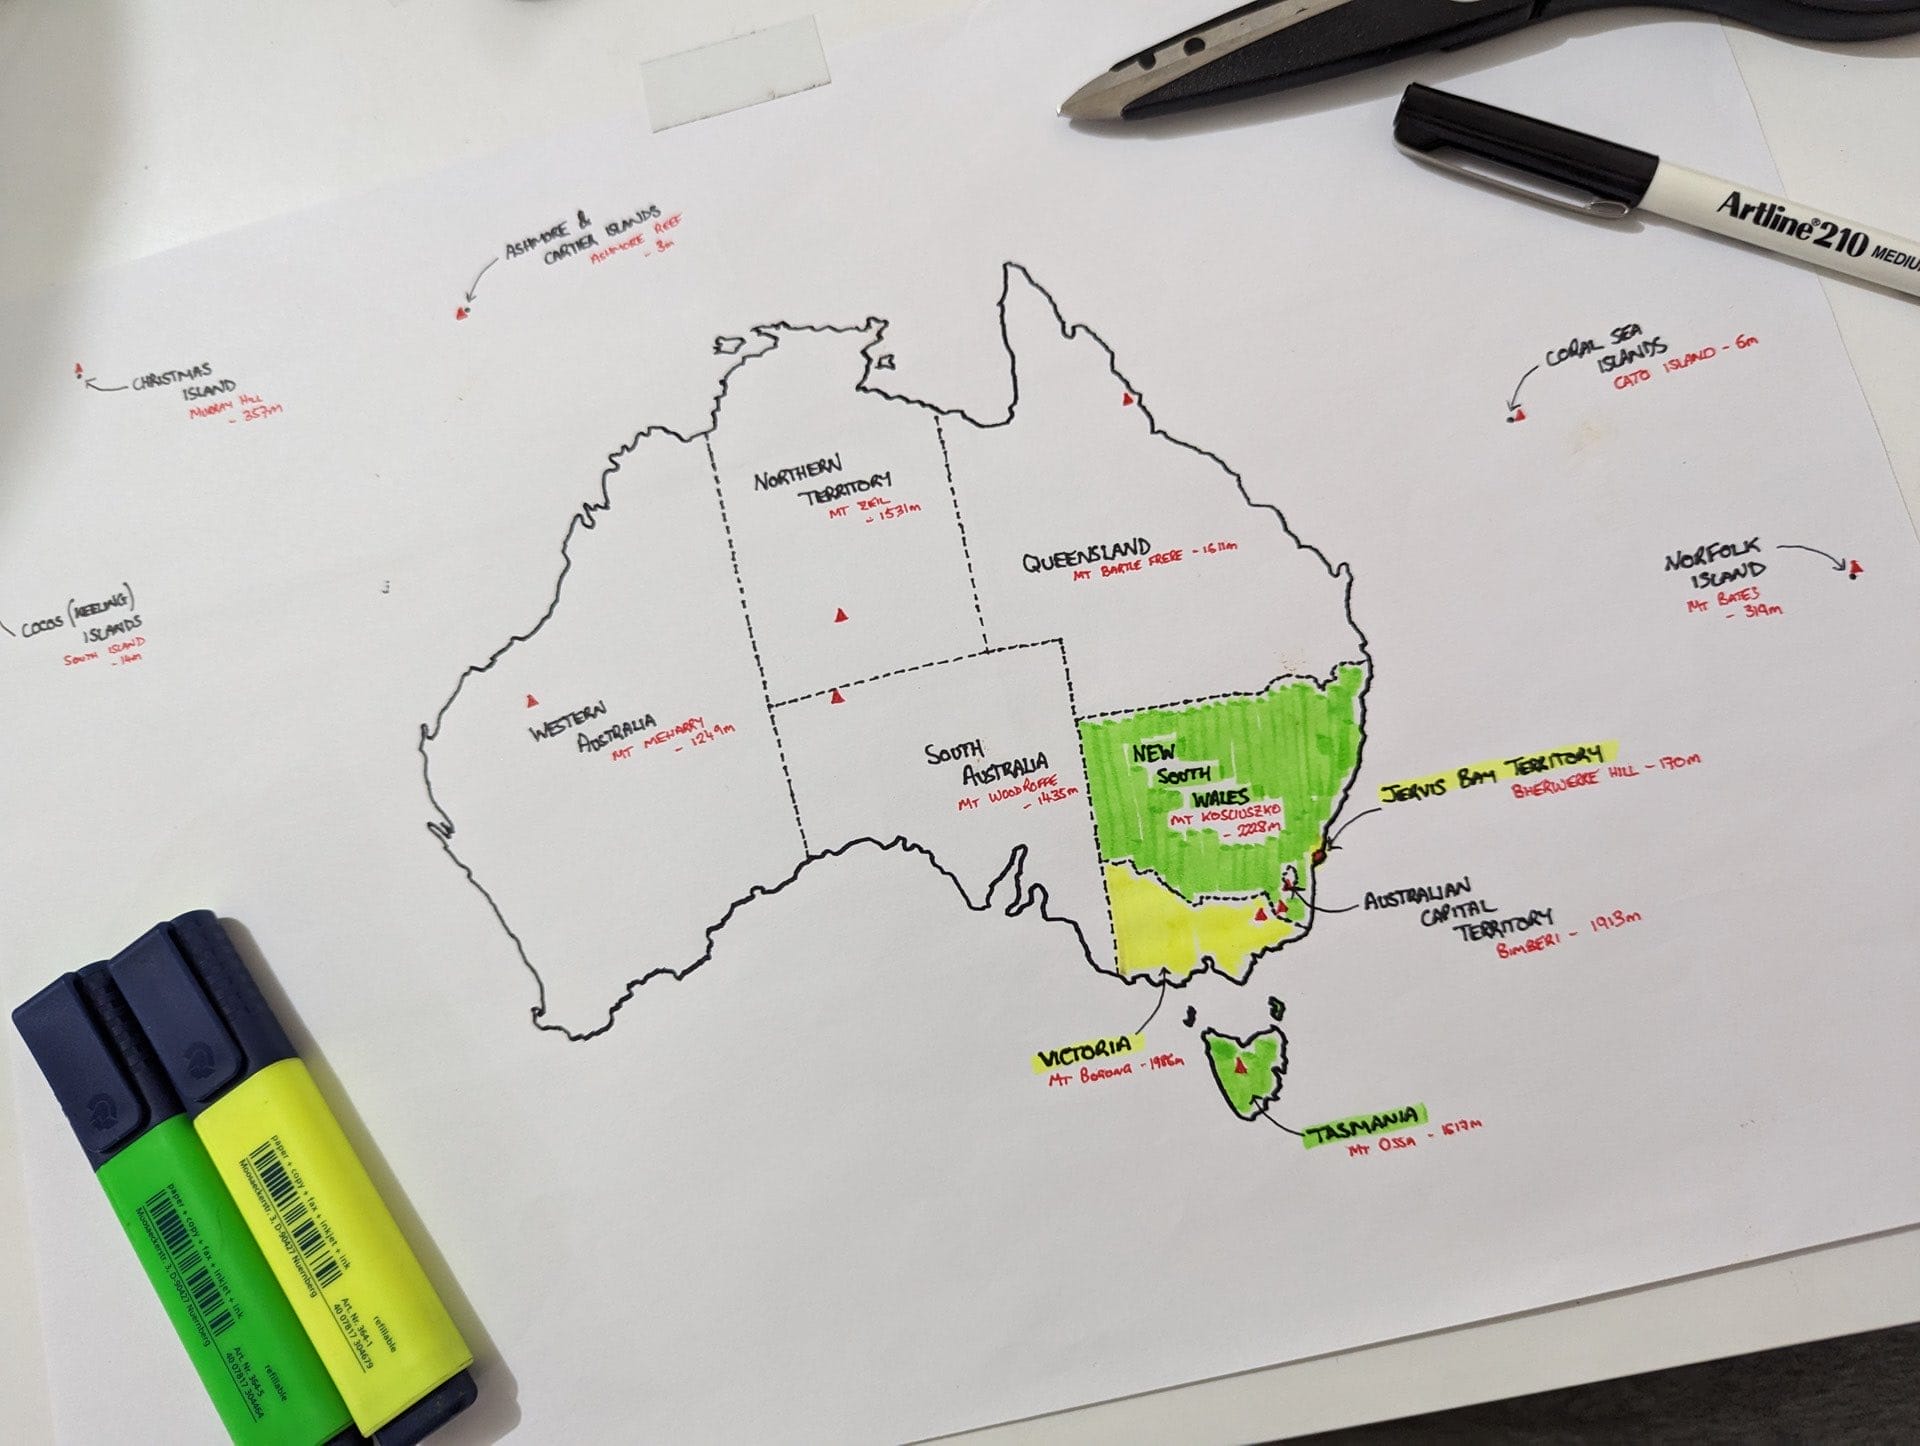 This Guy is Summiting the Highest Point in All 16 of Australia's States & Territories, william crompton, hiking, australian mountains, map of australia with highlighted areas to hike in green and yellow